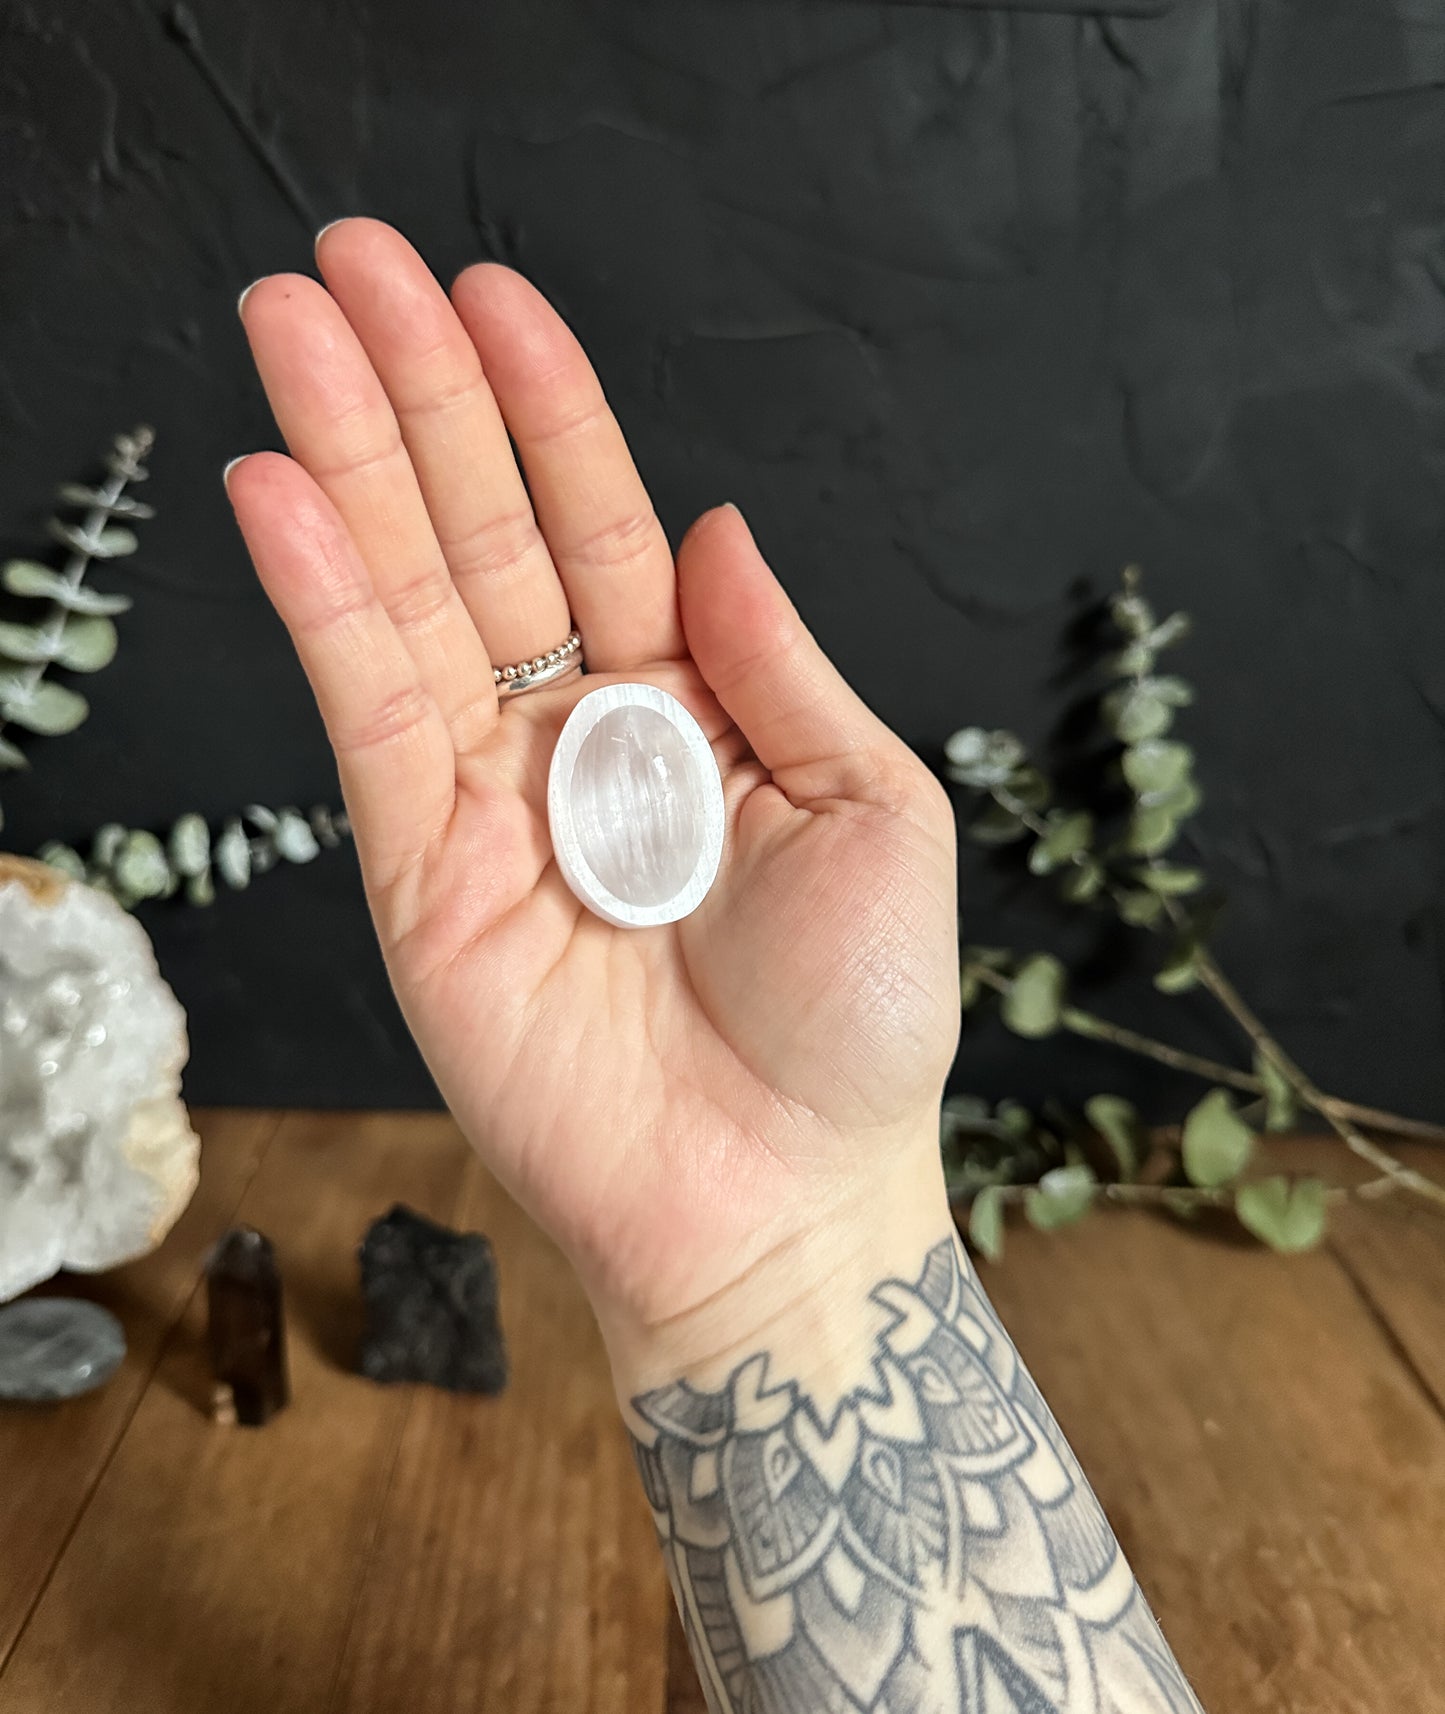 Selenite Worry Stone from the Good Vibes Only Crystal Set at The Stone Maidens